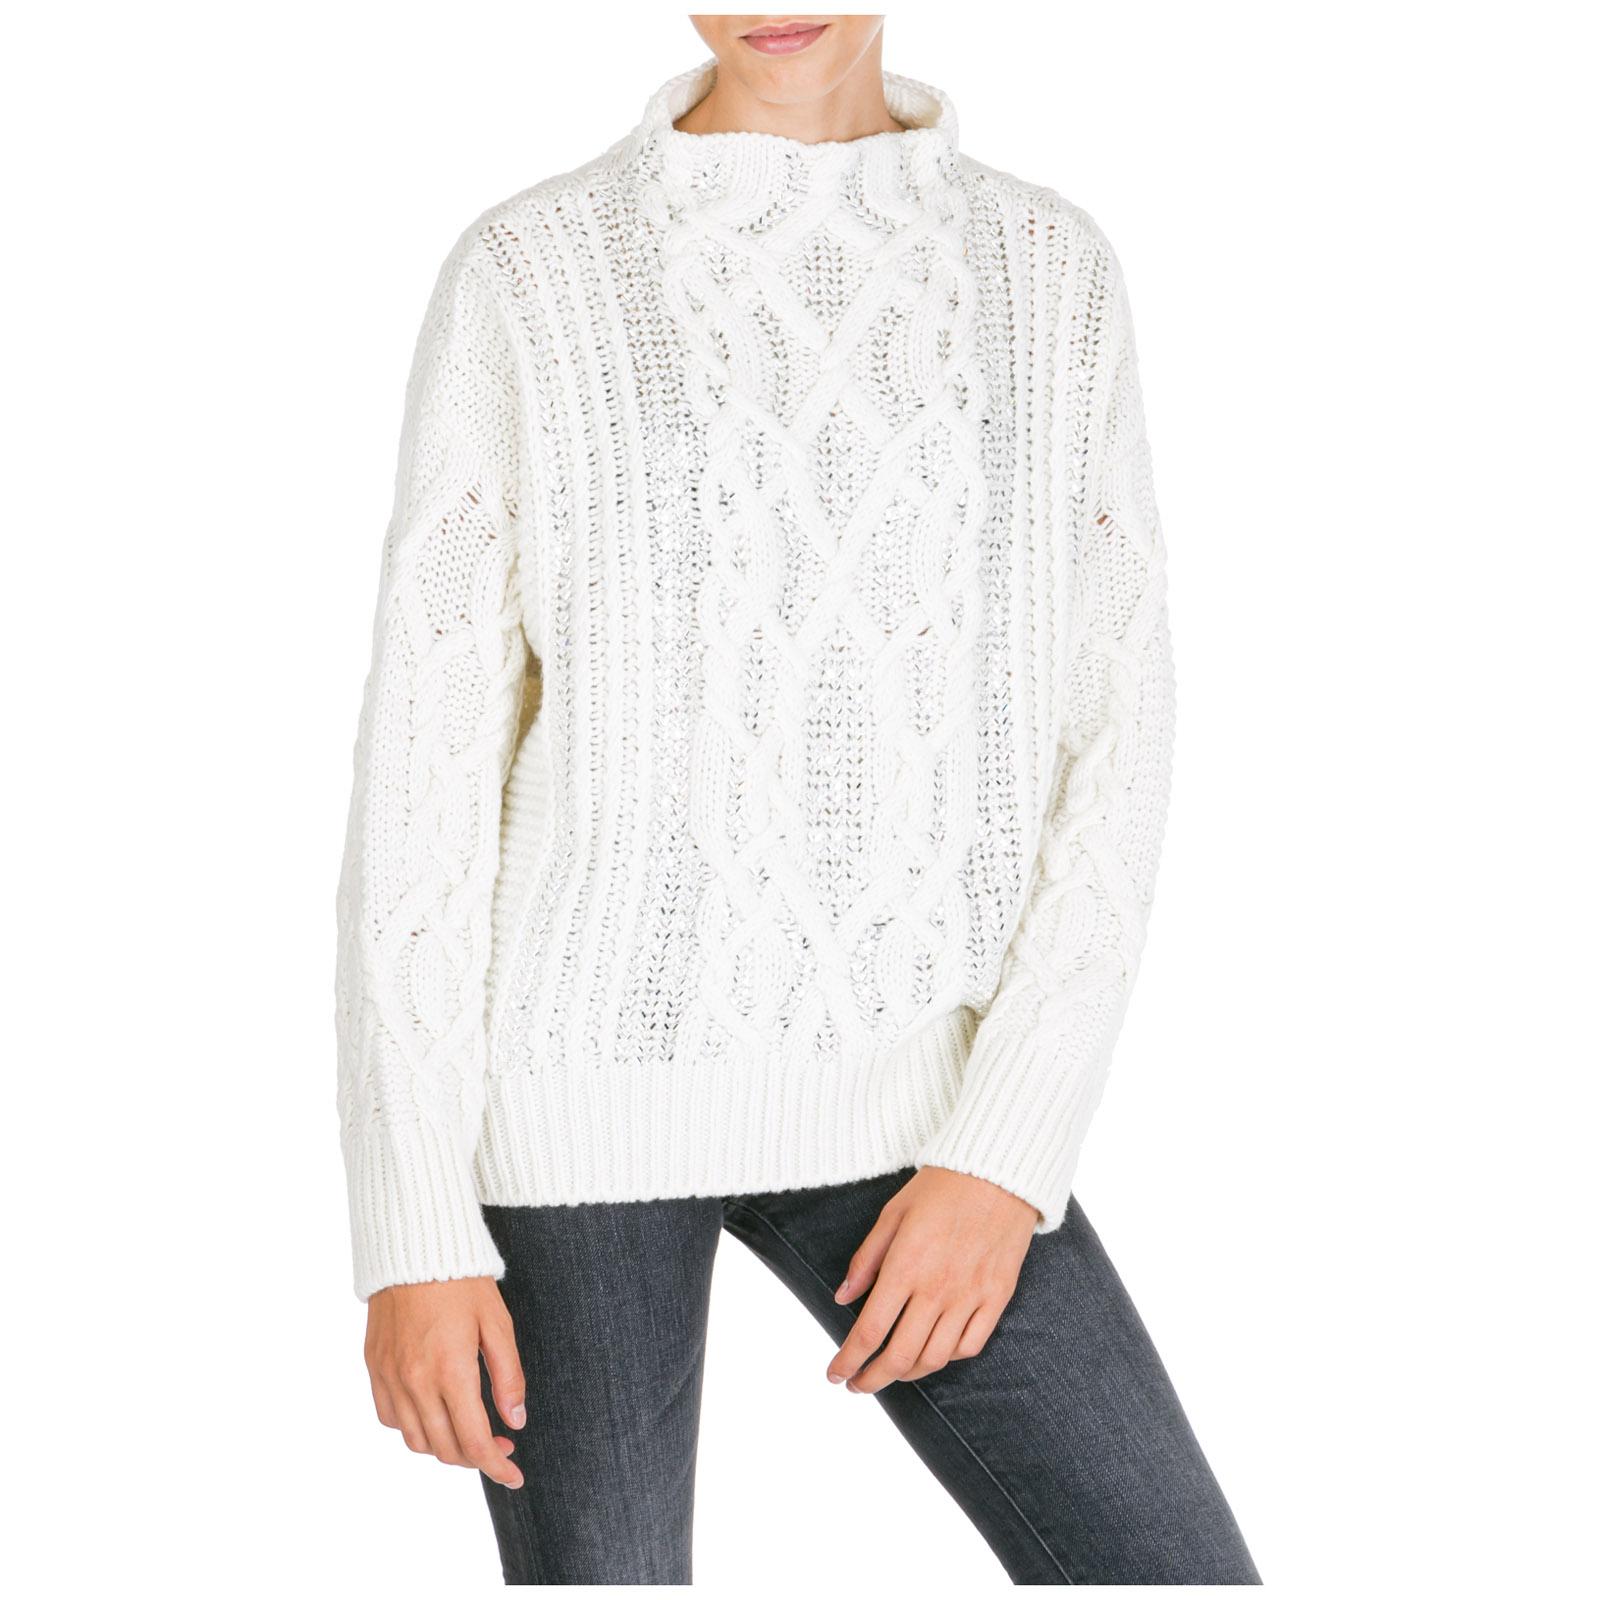 Ermanno Scervino Synthetic Women's Jumper Sweater in White - Lyst